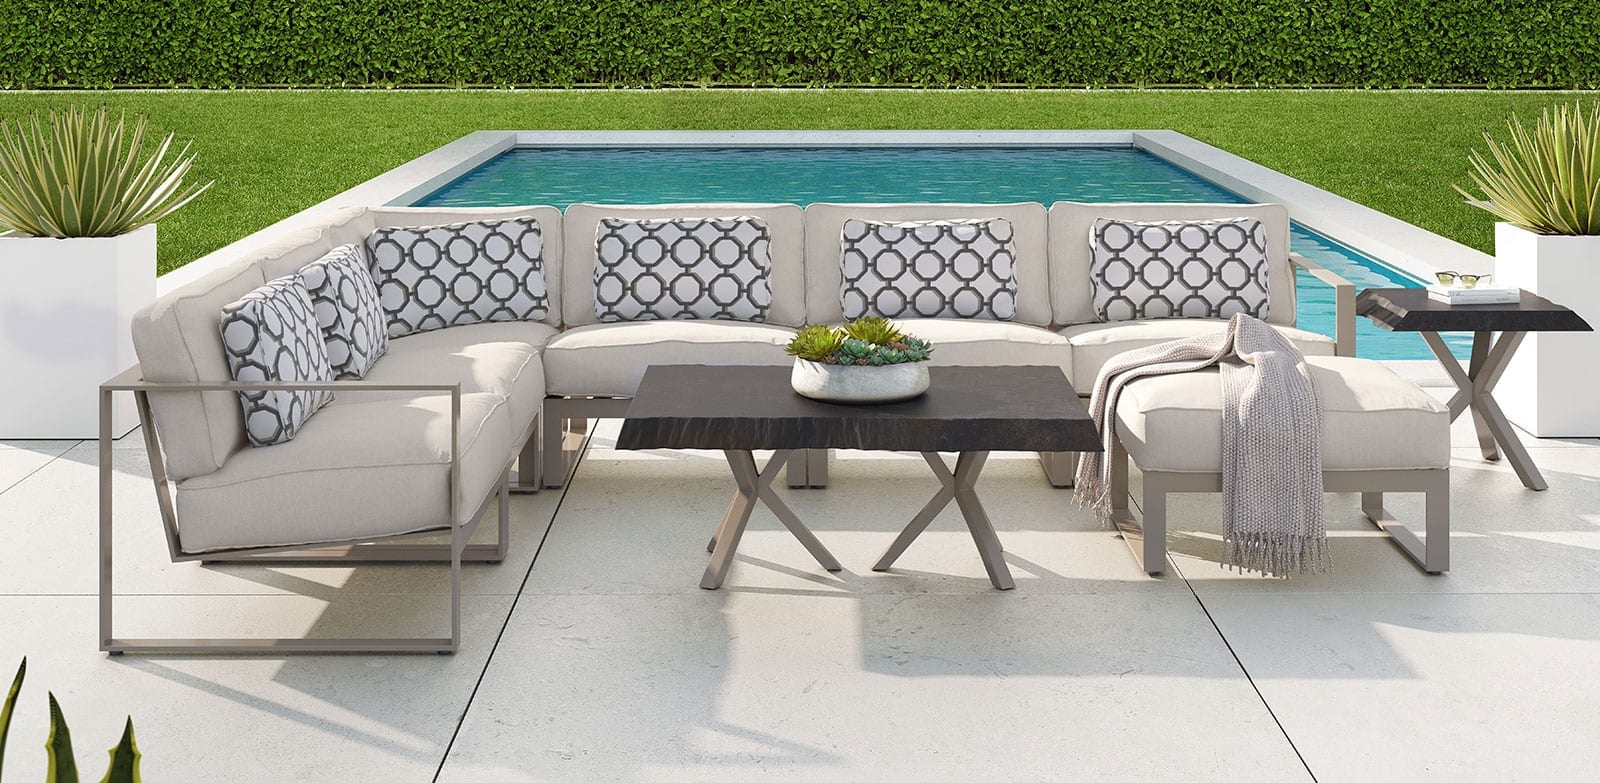 Park Place Sectional patio furniture set from Castelle on patio in front of pool